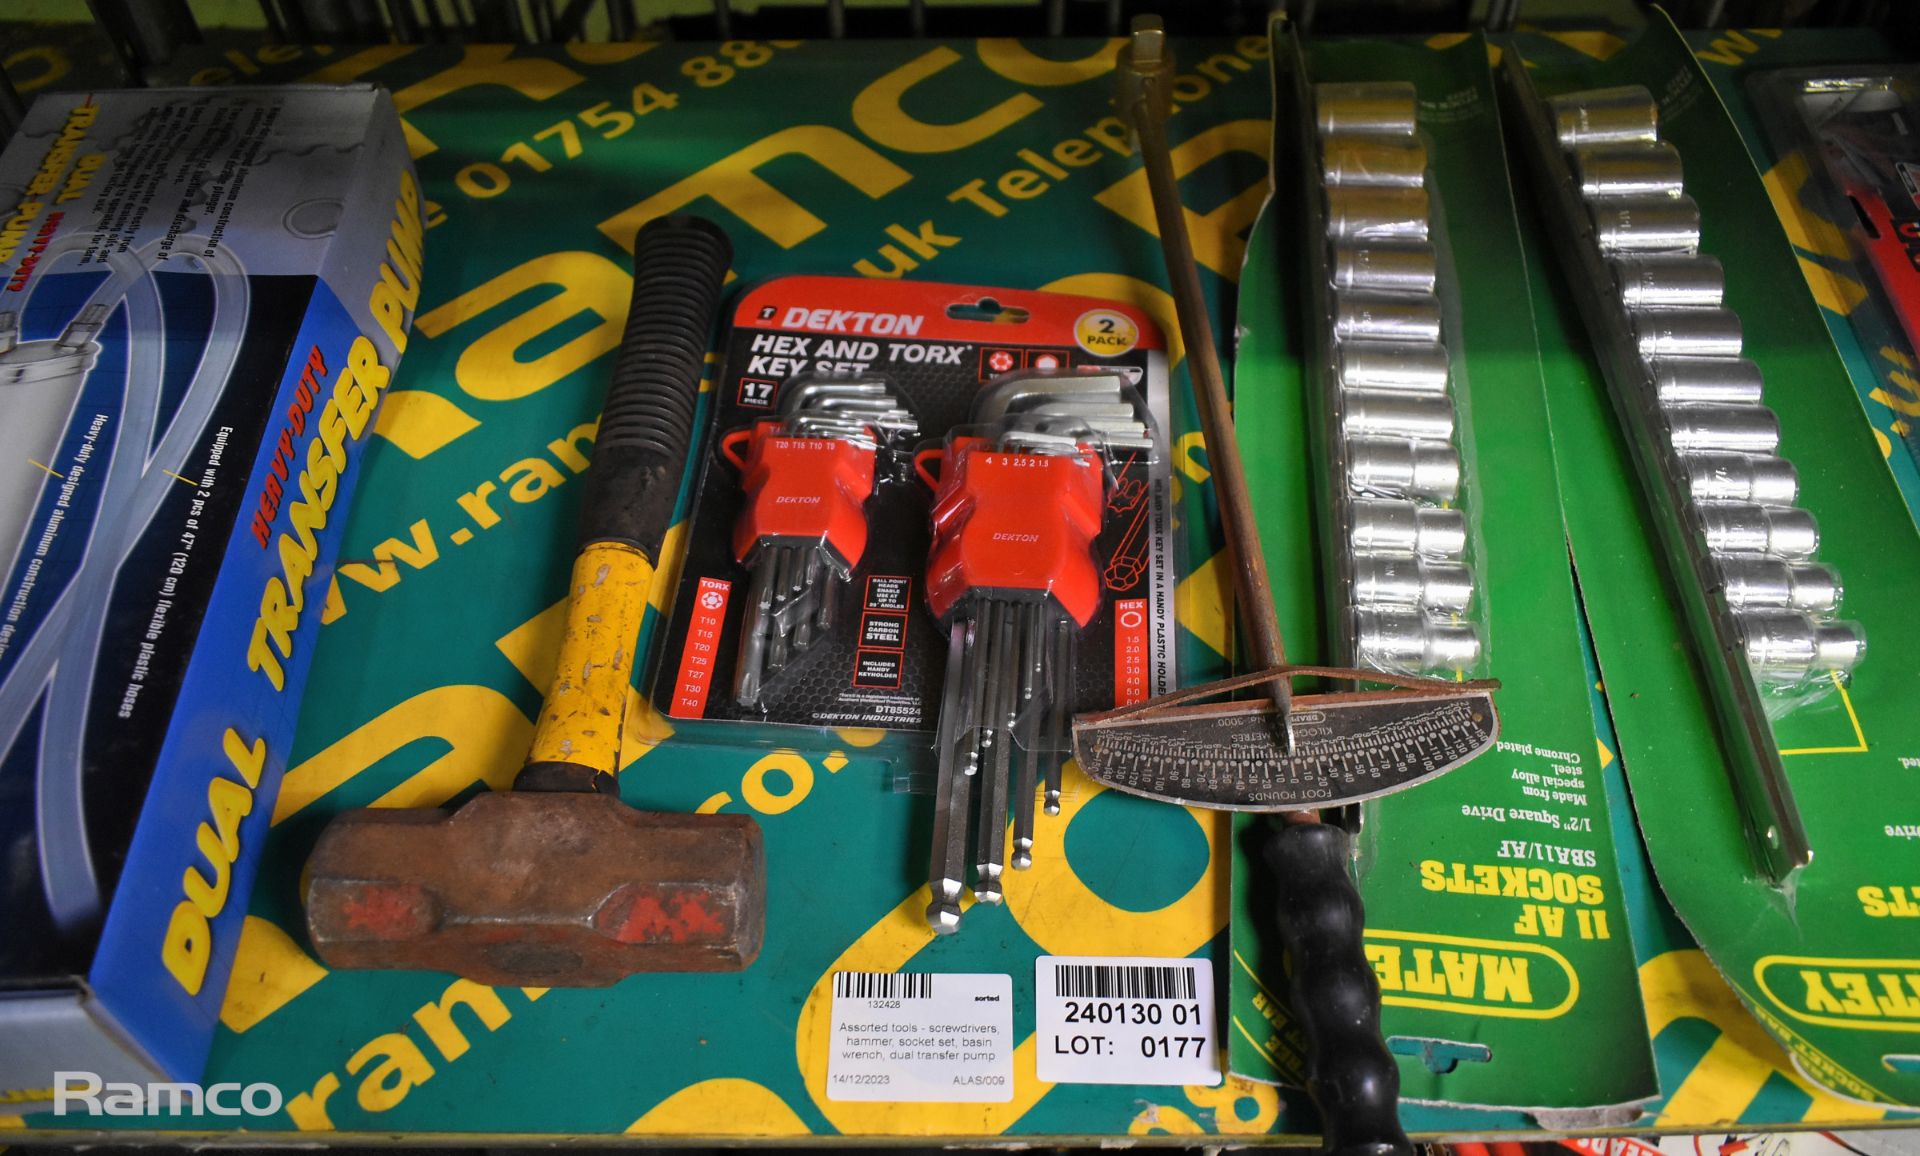 Assorted tools - screwdrivers, hammer, socket set, basin wrench, dual transfer pumpx 2x axes - Image 5 of 7